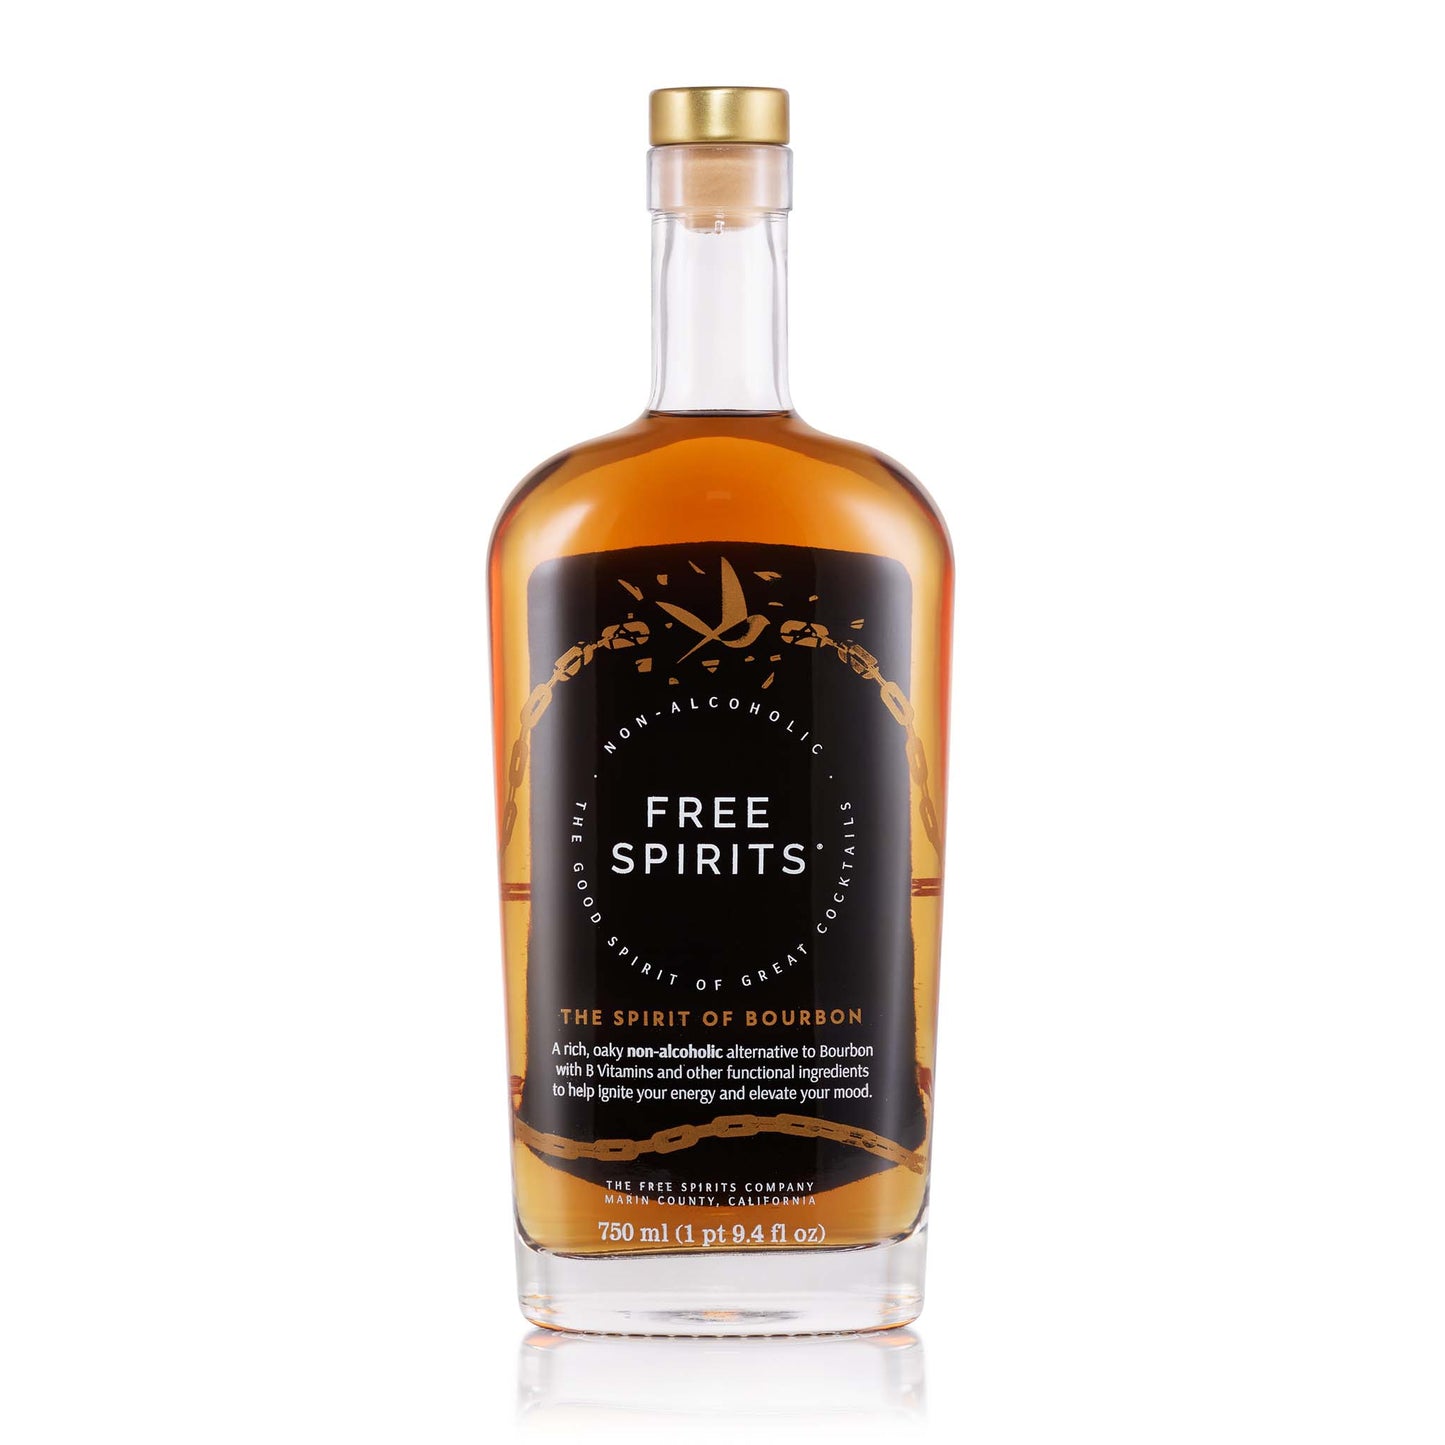 The Spirit of Bourbon by The Free Spirits Company